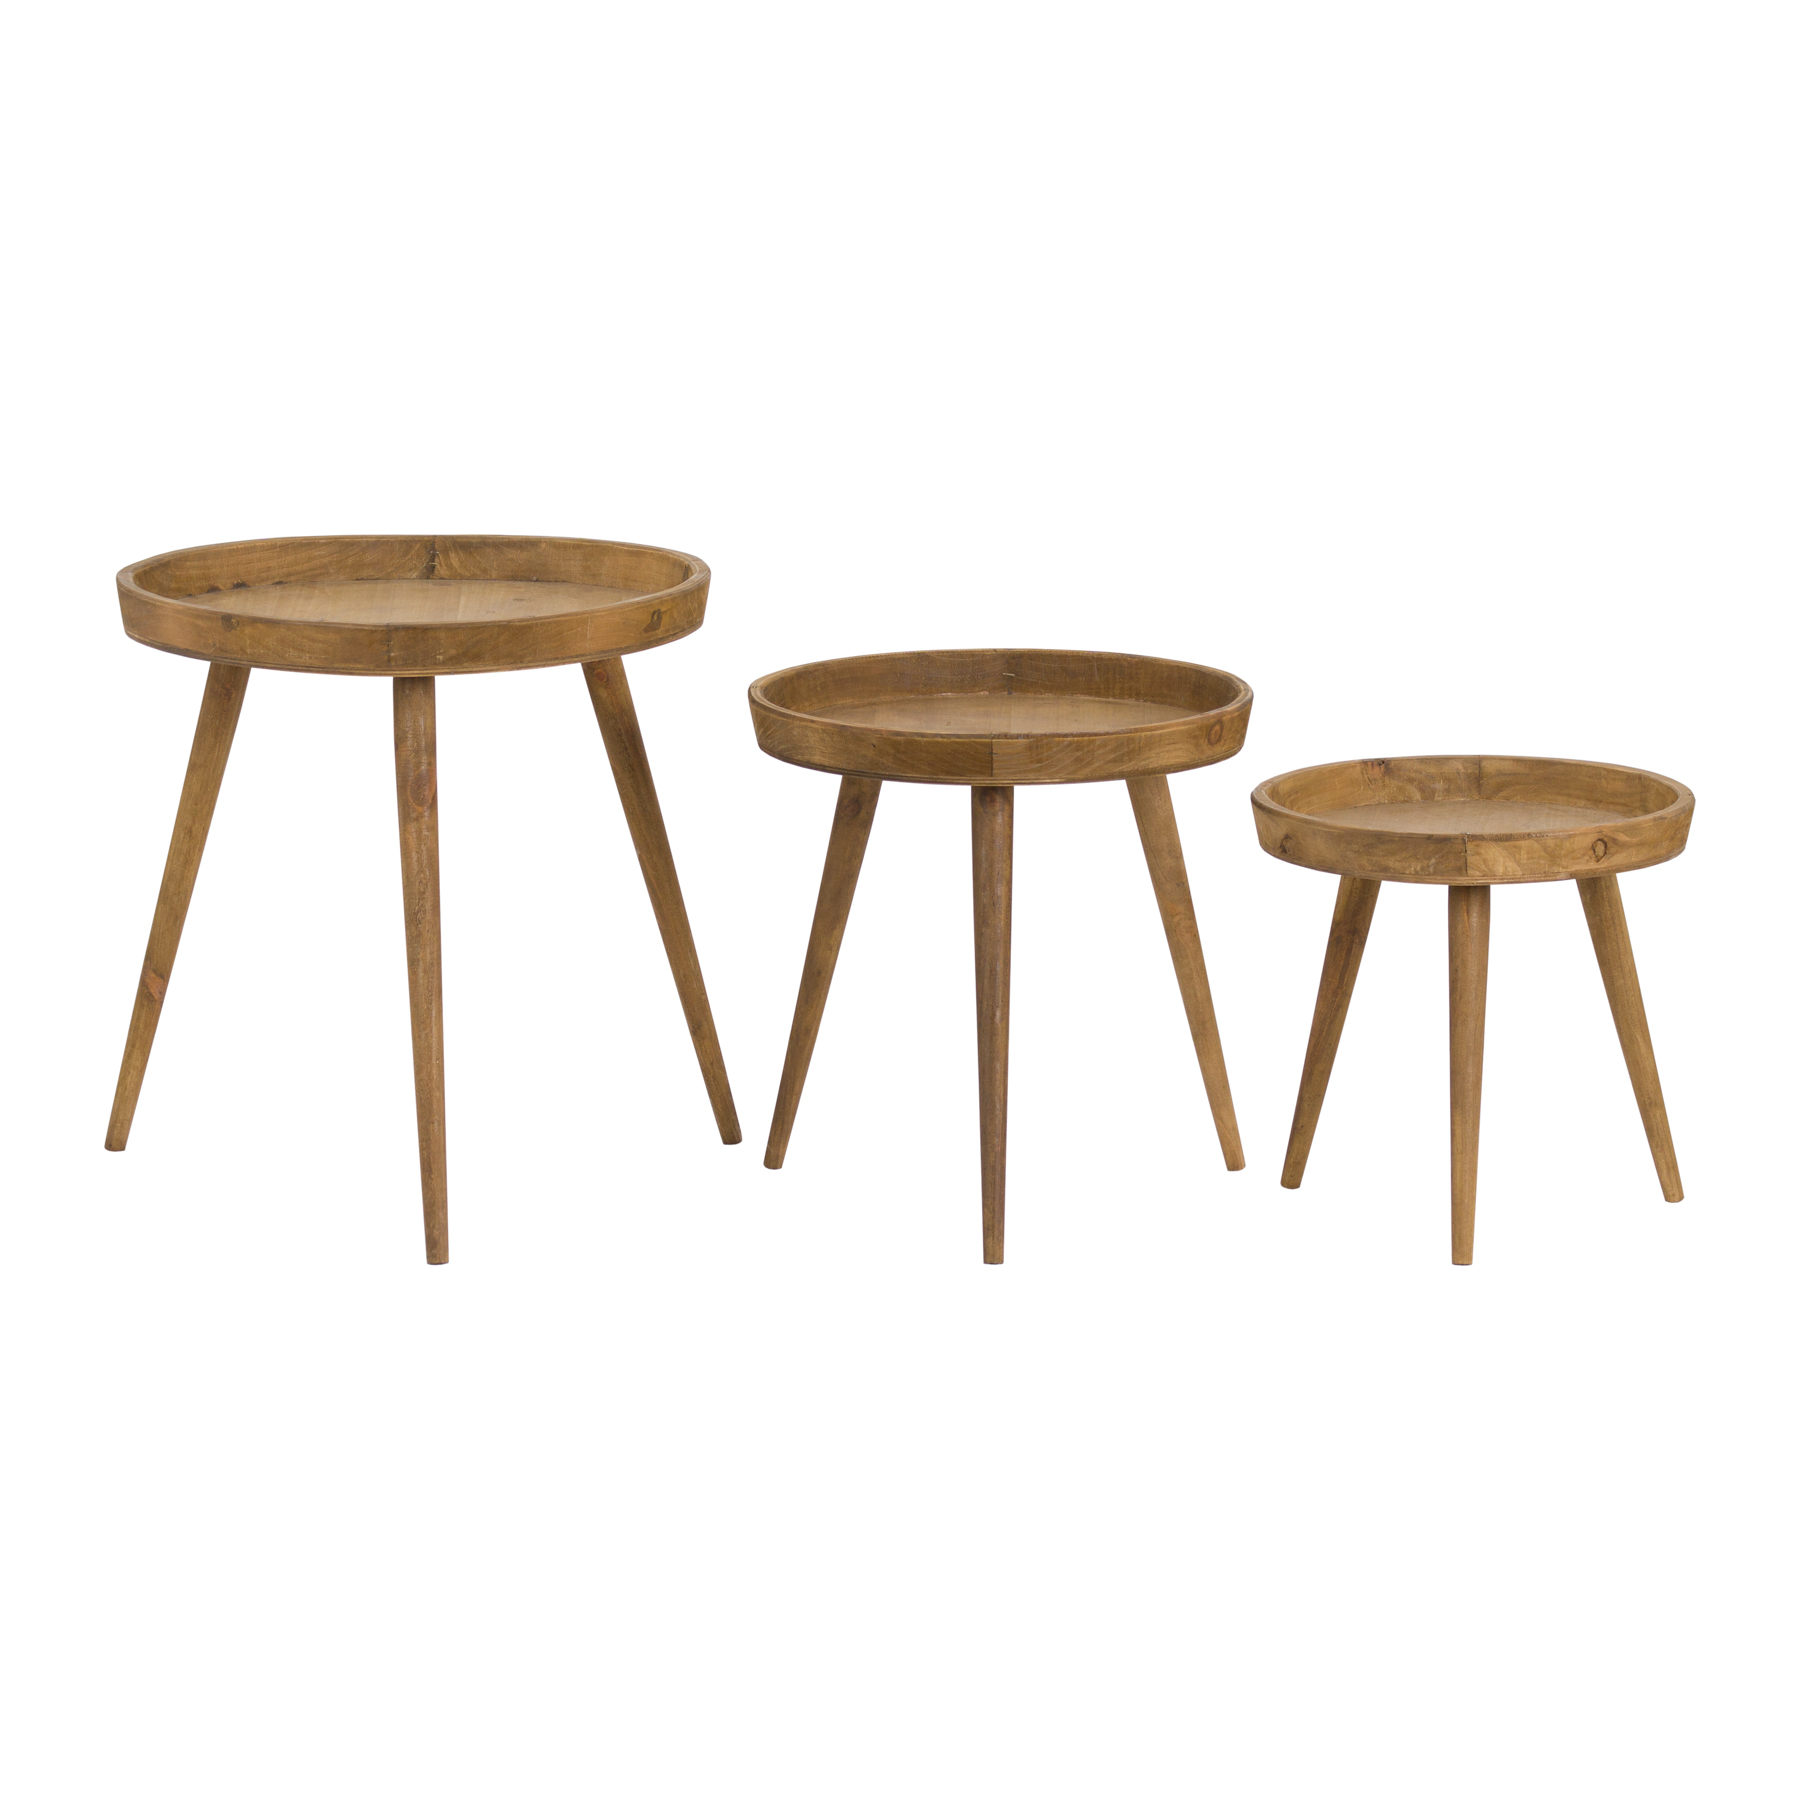 Loft Collection Set Of 3 Round Wooden Table - Image 1